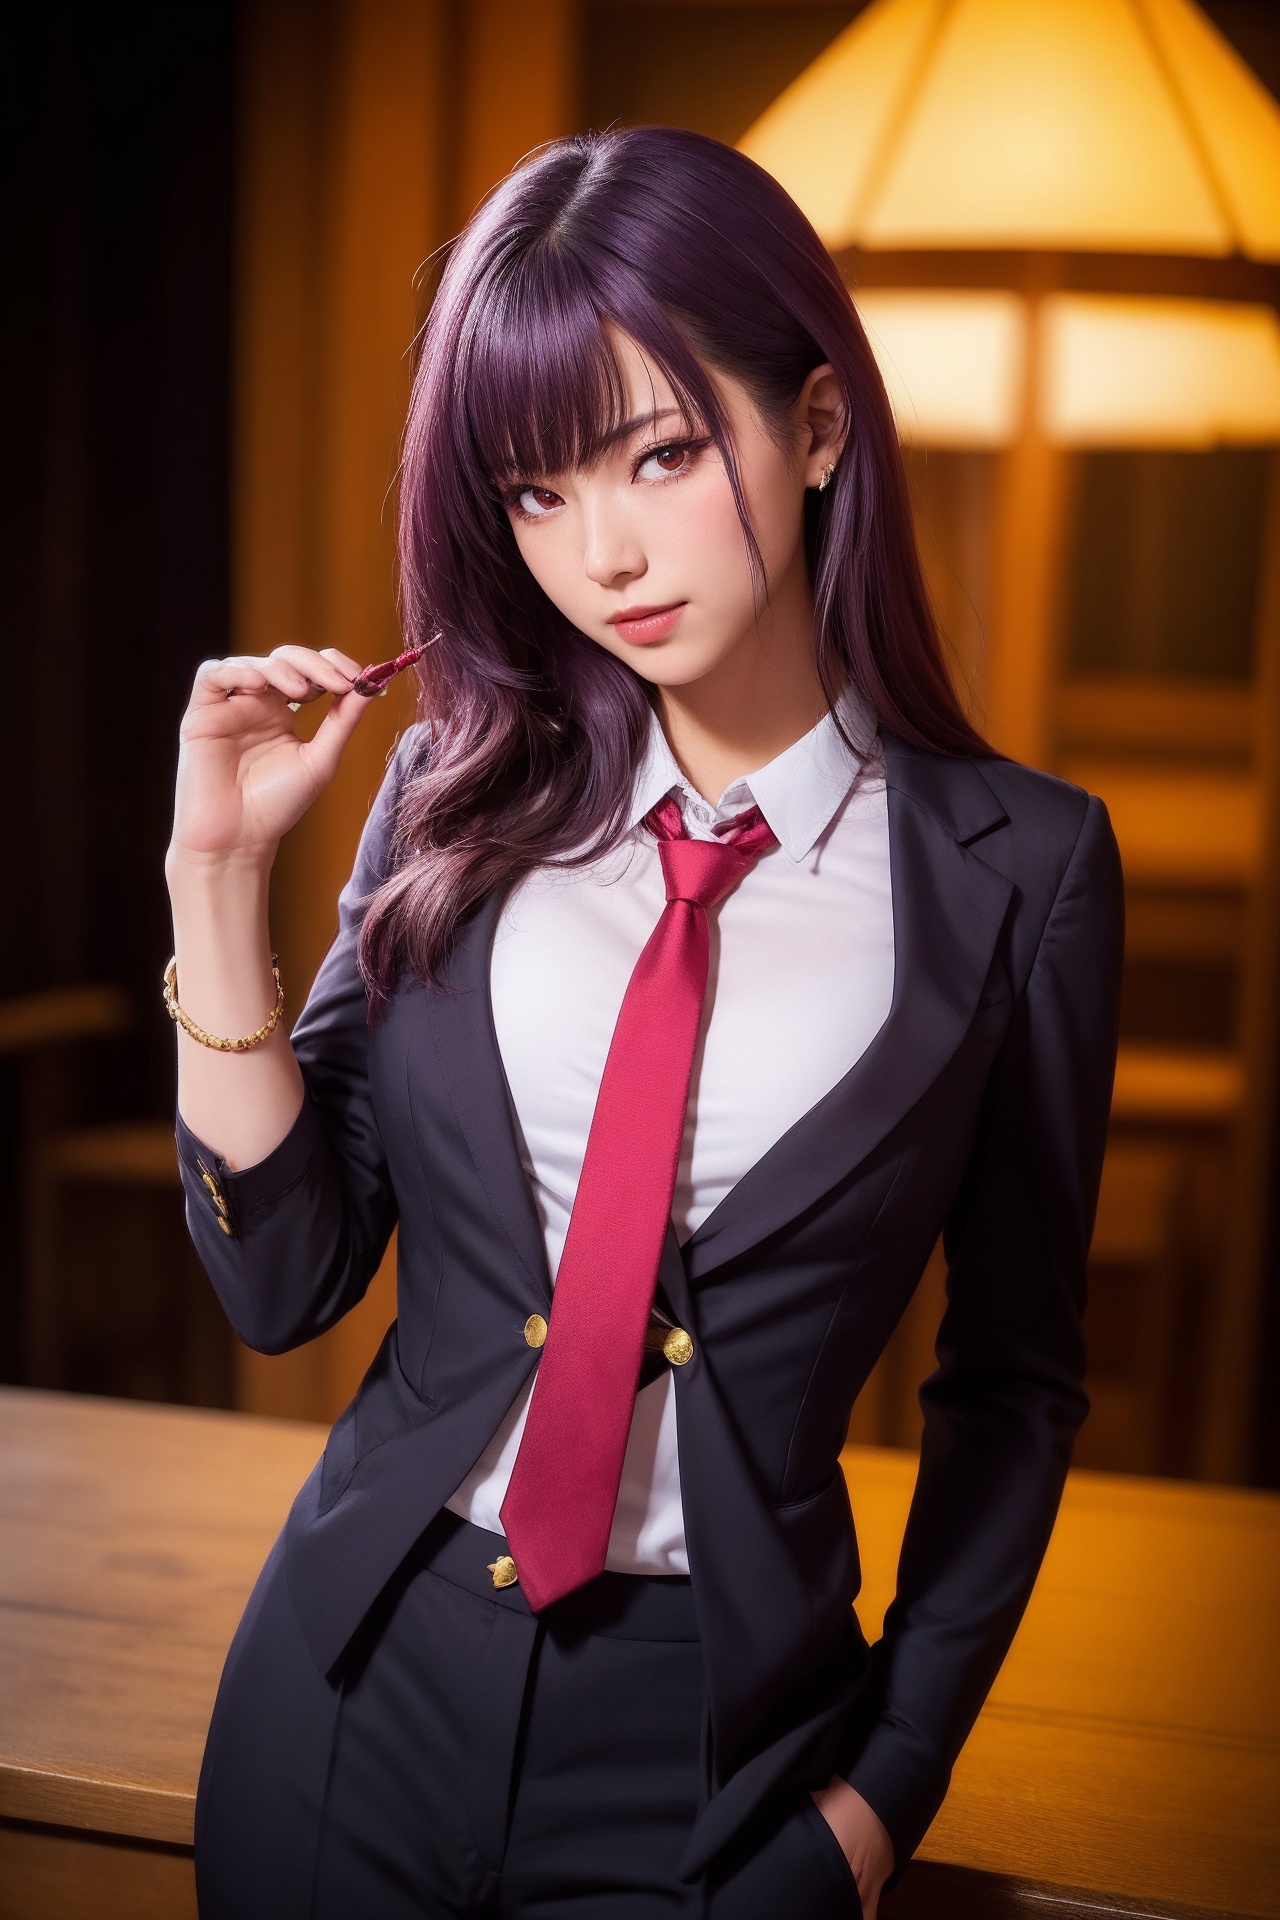 Scáthach | Fate/Grand Order image by mmtrs